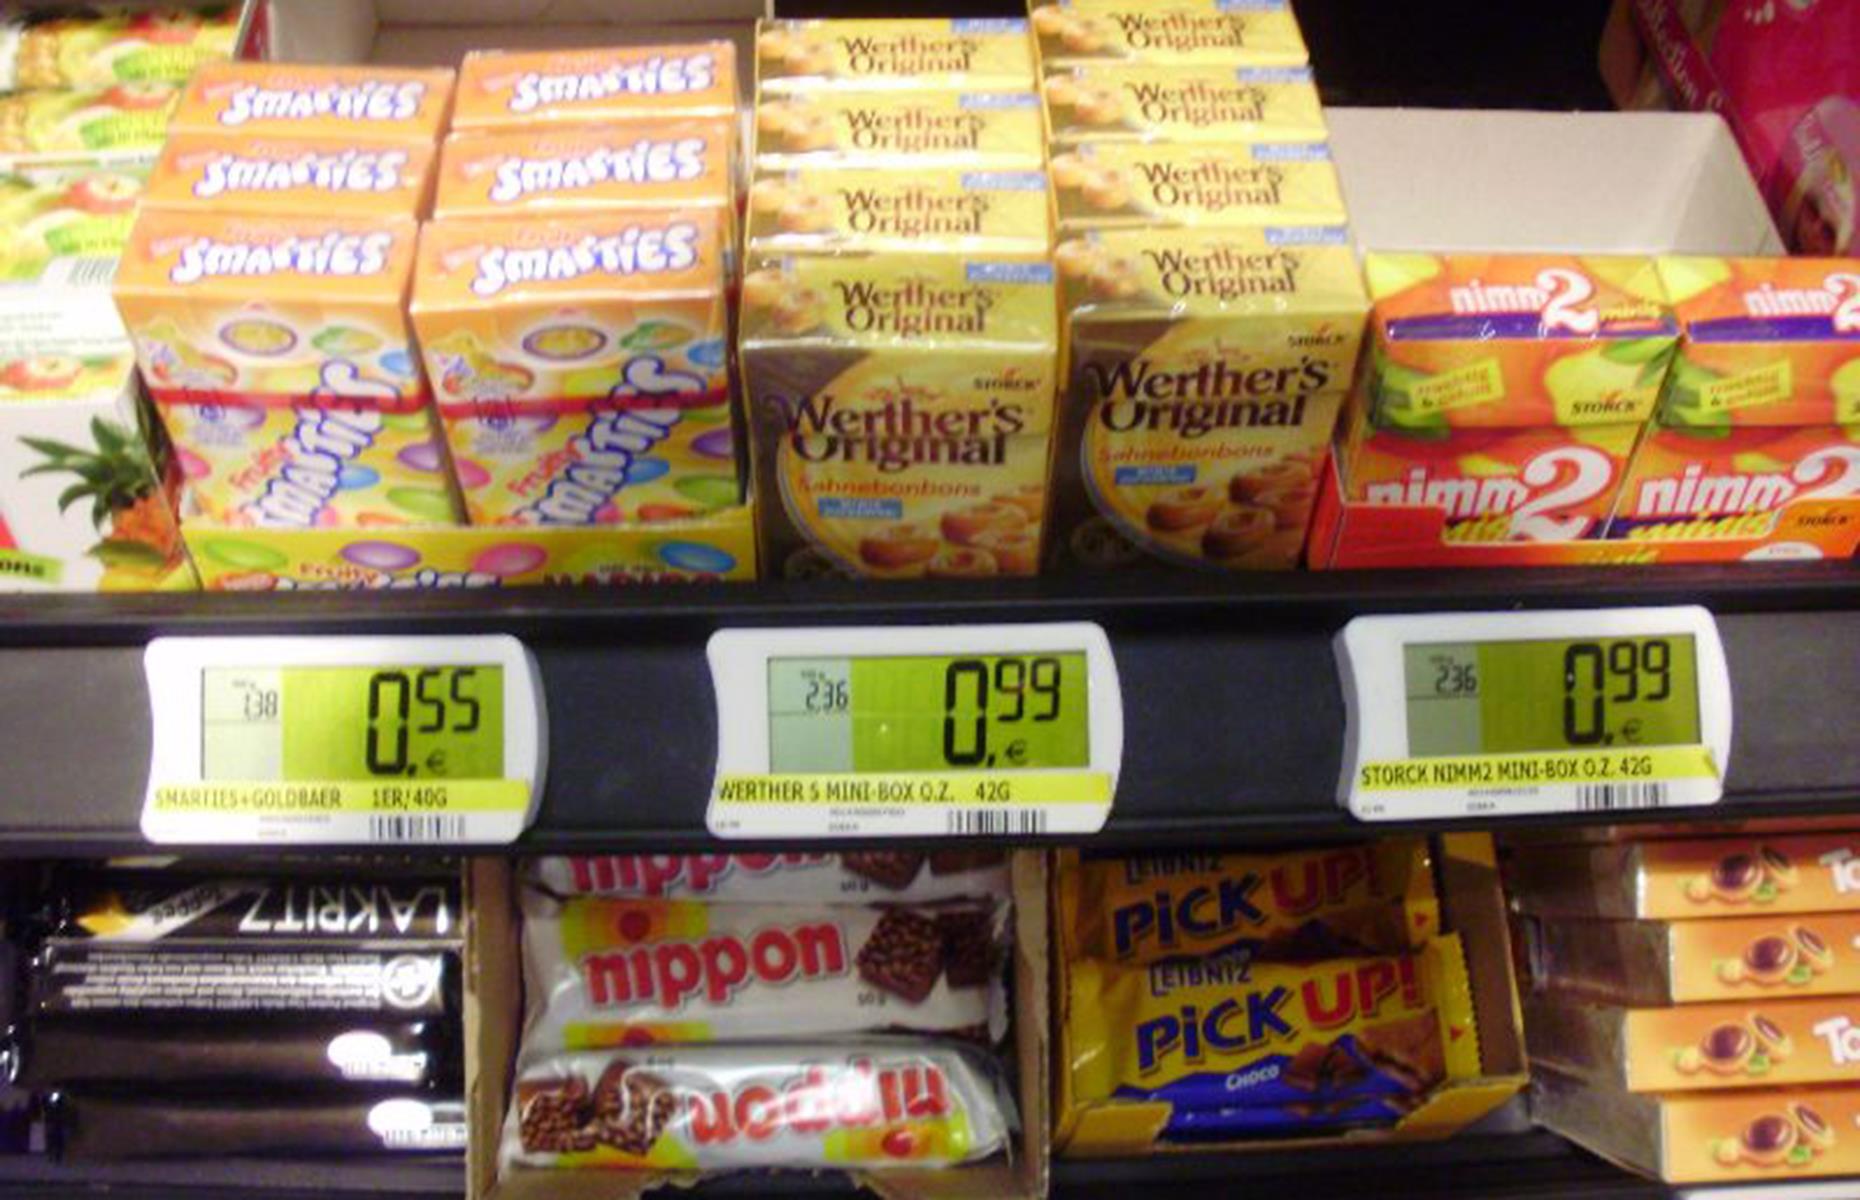 13. Digital pricing in stores